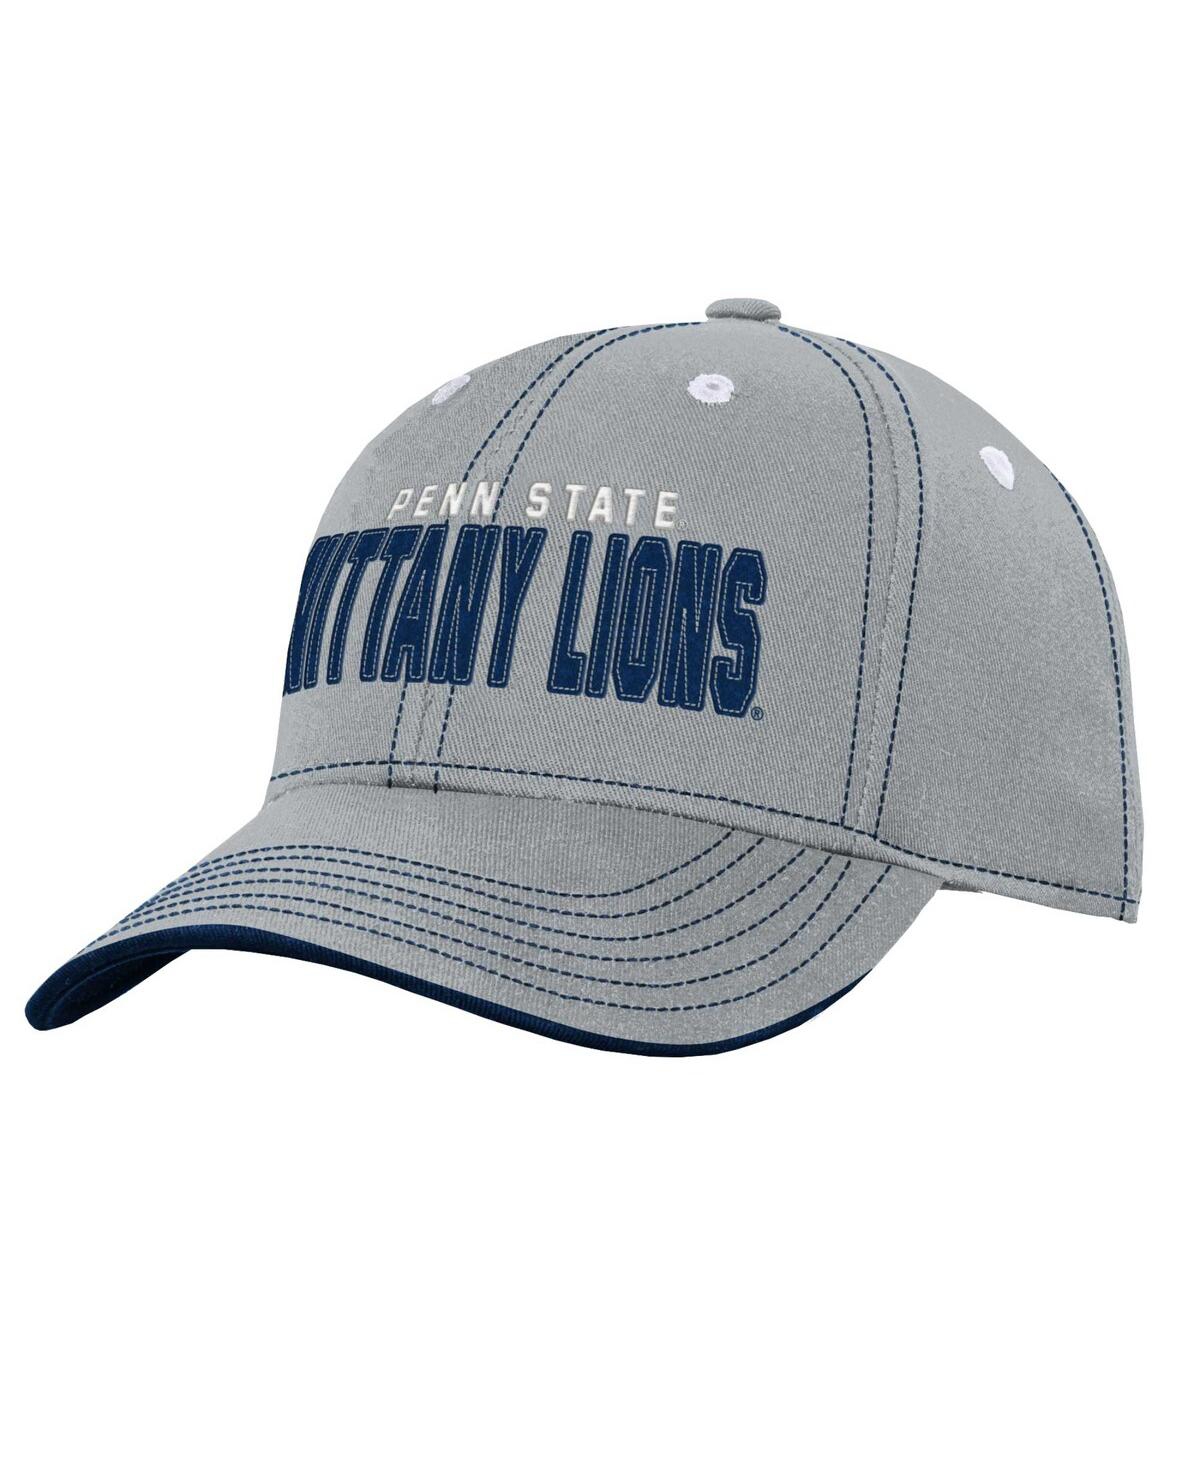 Outerstuff Kids' Youth Boys And Girls Gray Penn State Nittany Lions Old School Slouch Adjustable Hat